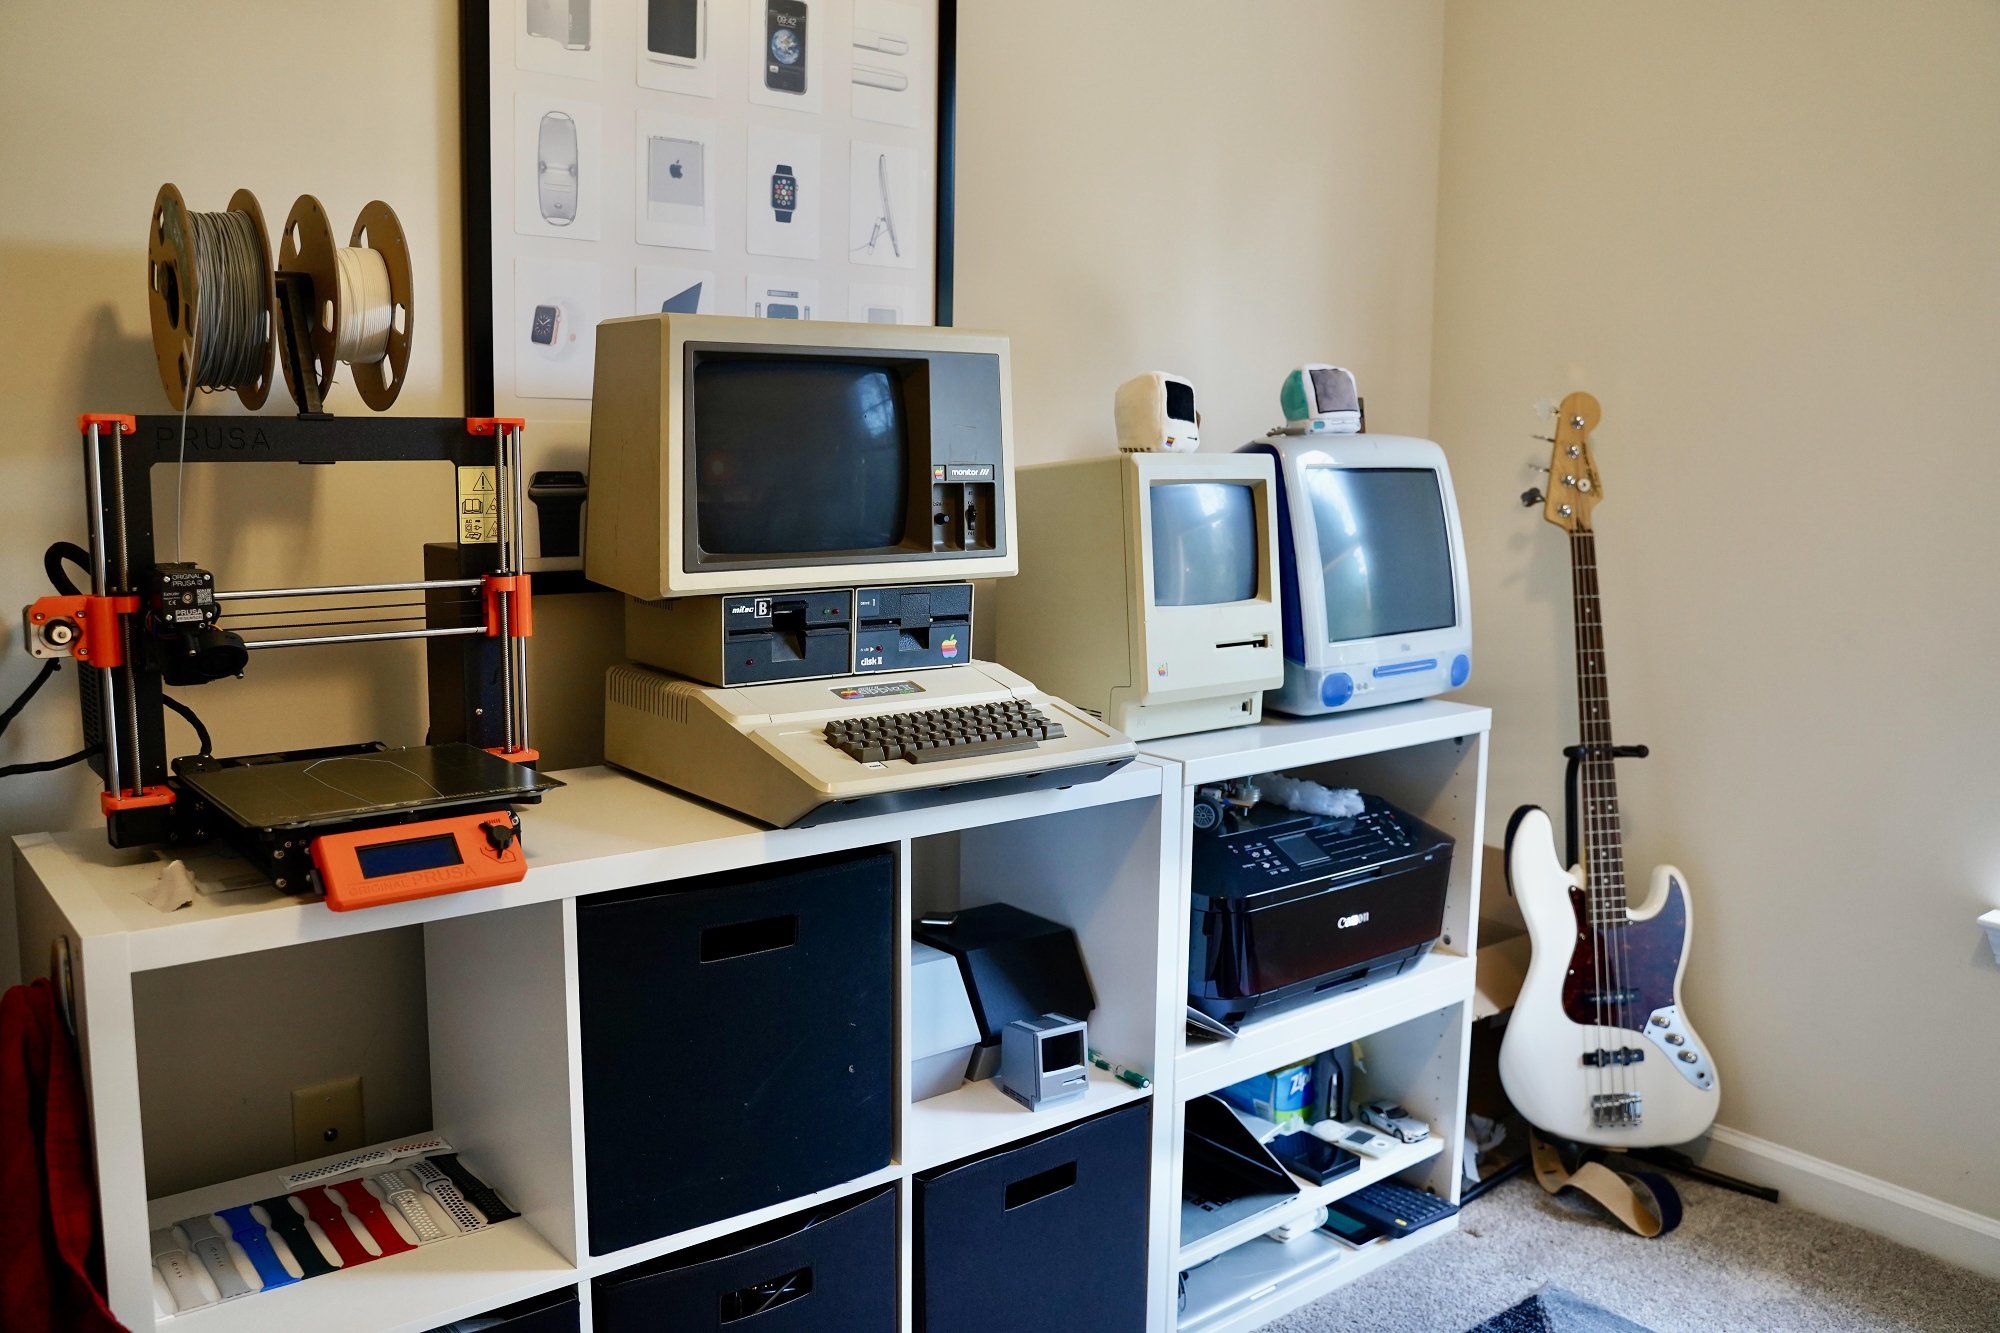 A collection of vintage Apple computers, plus a guitar in the corner